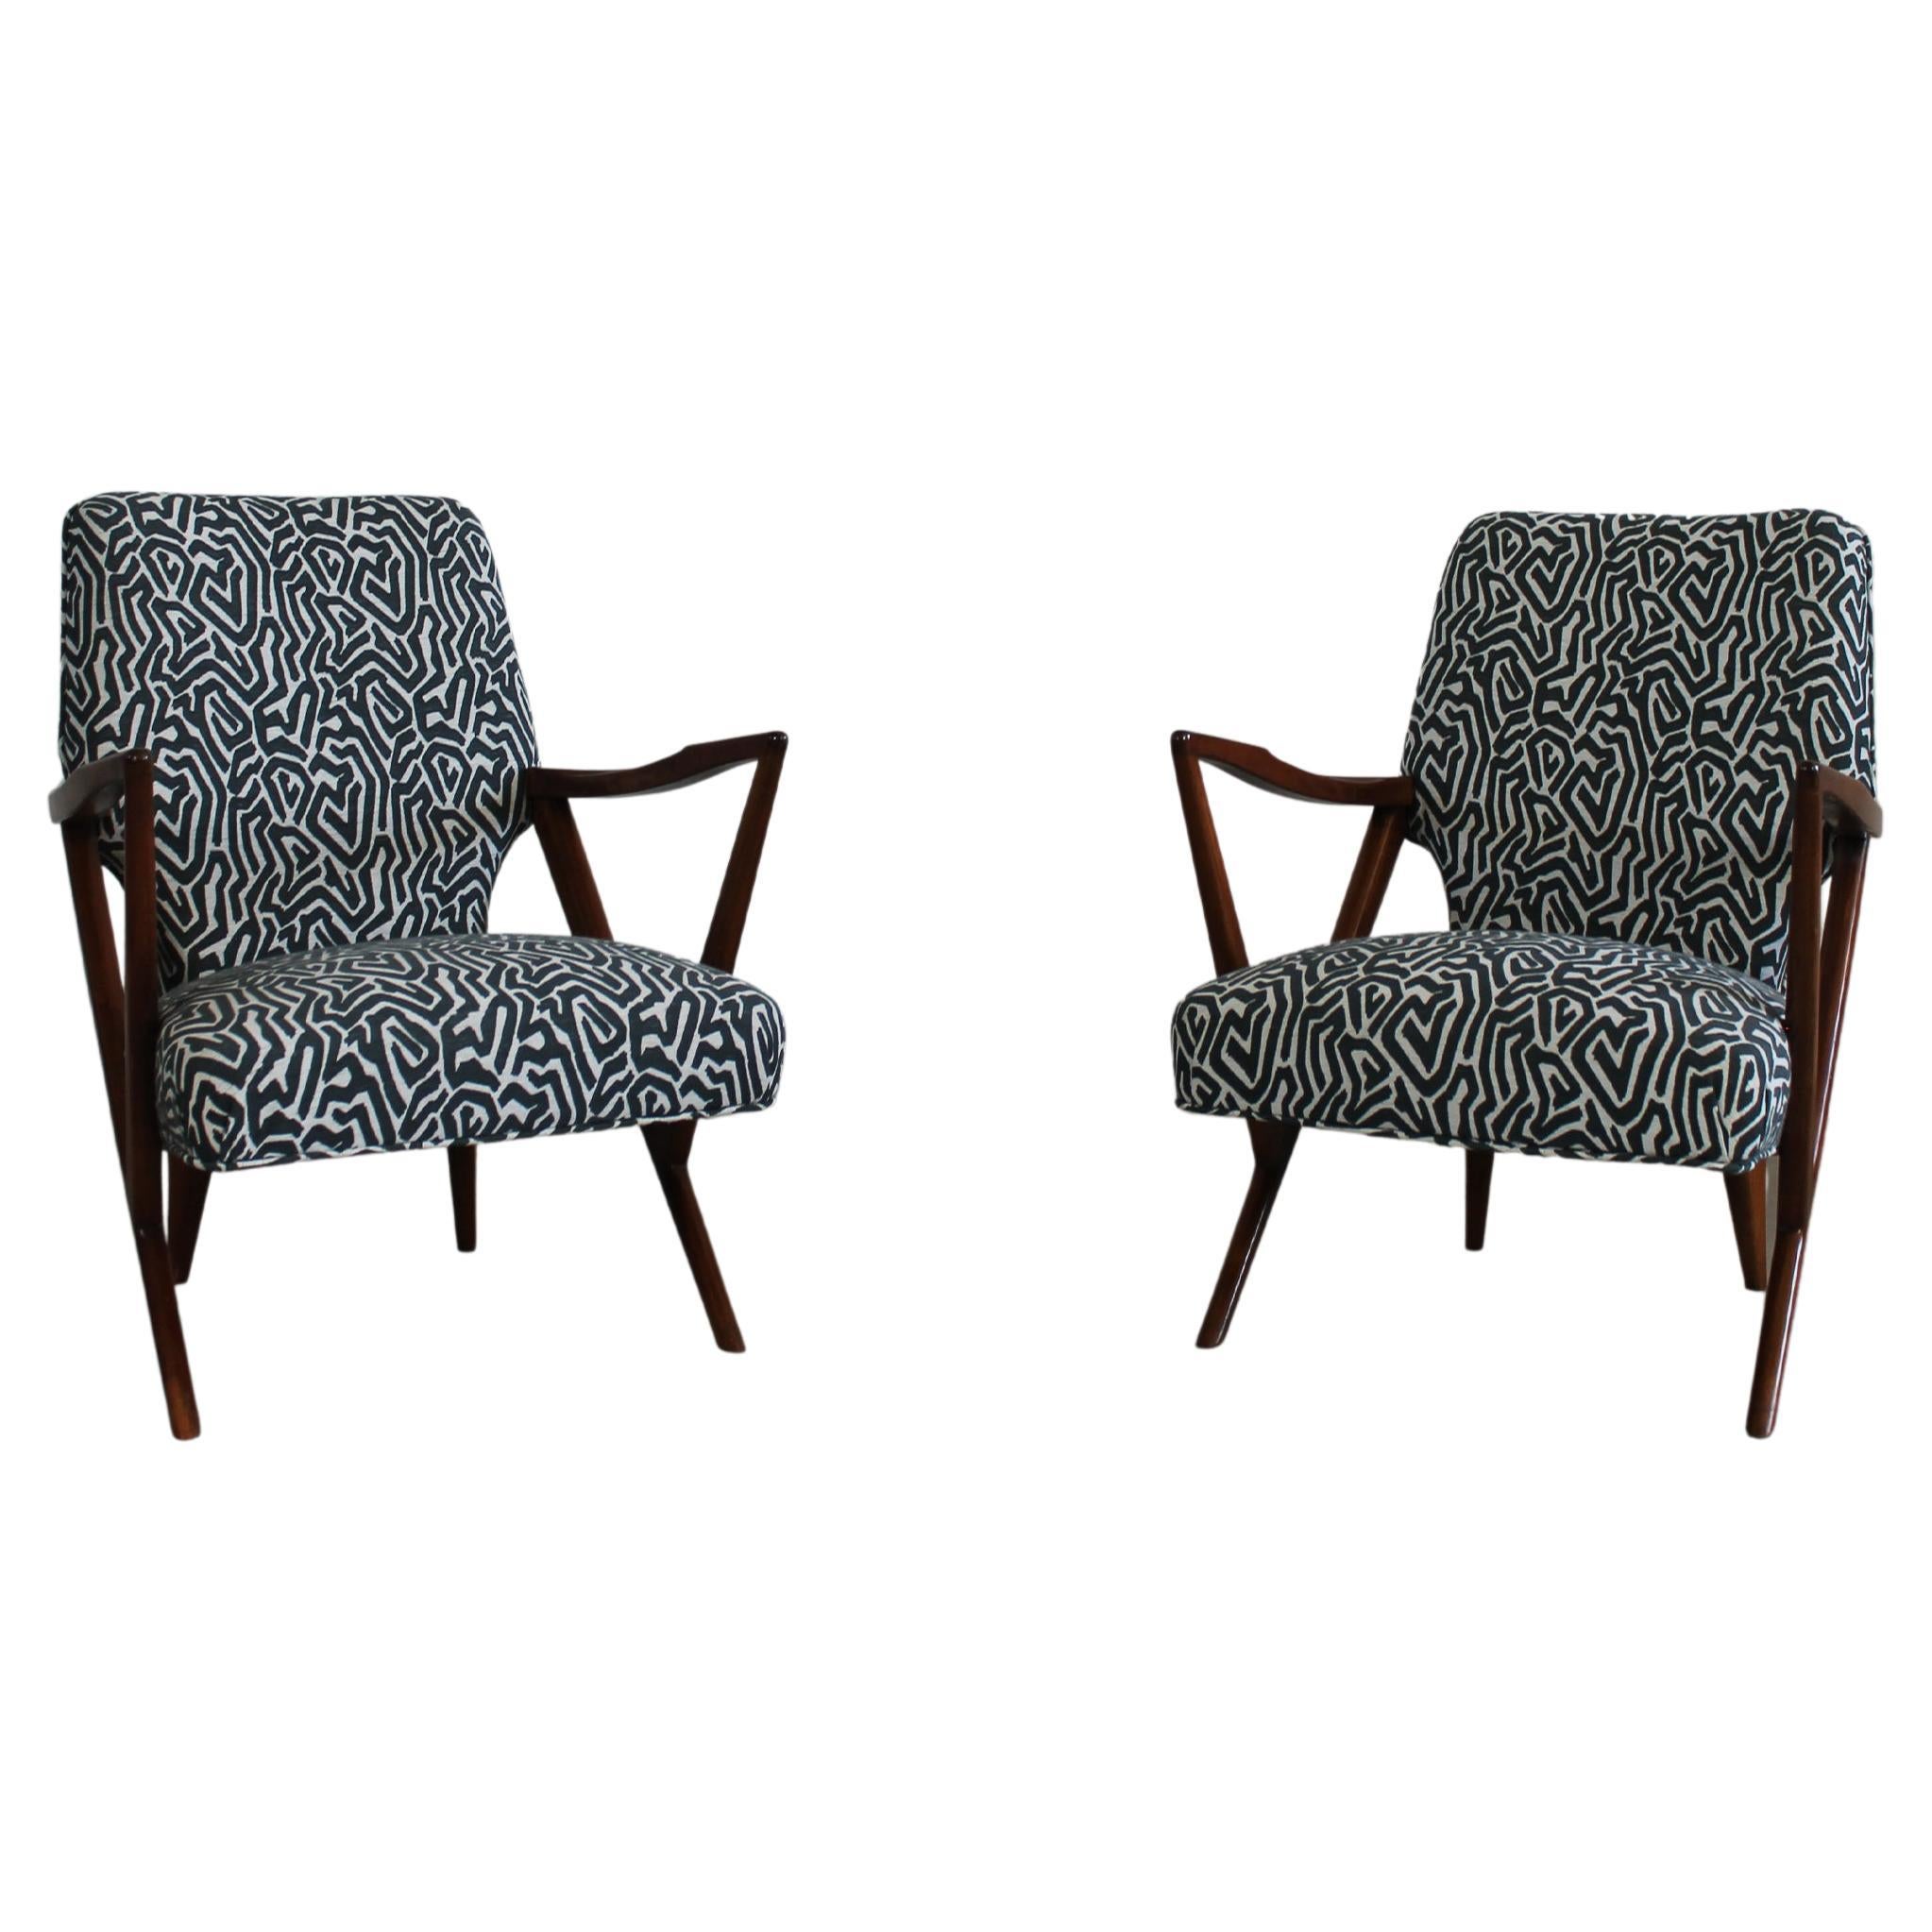 Giuseppe Scapinelli Set of Two Armchairs in Walnut and Printed Fabric 1955